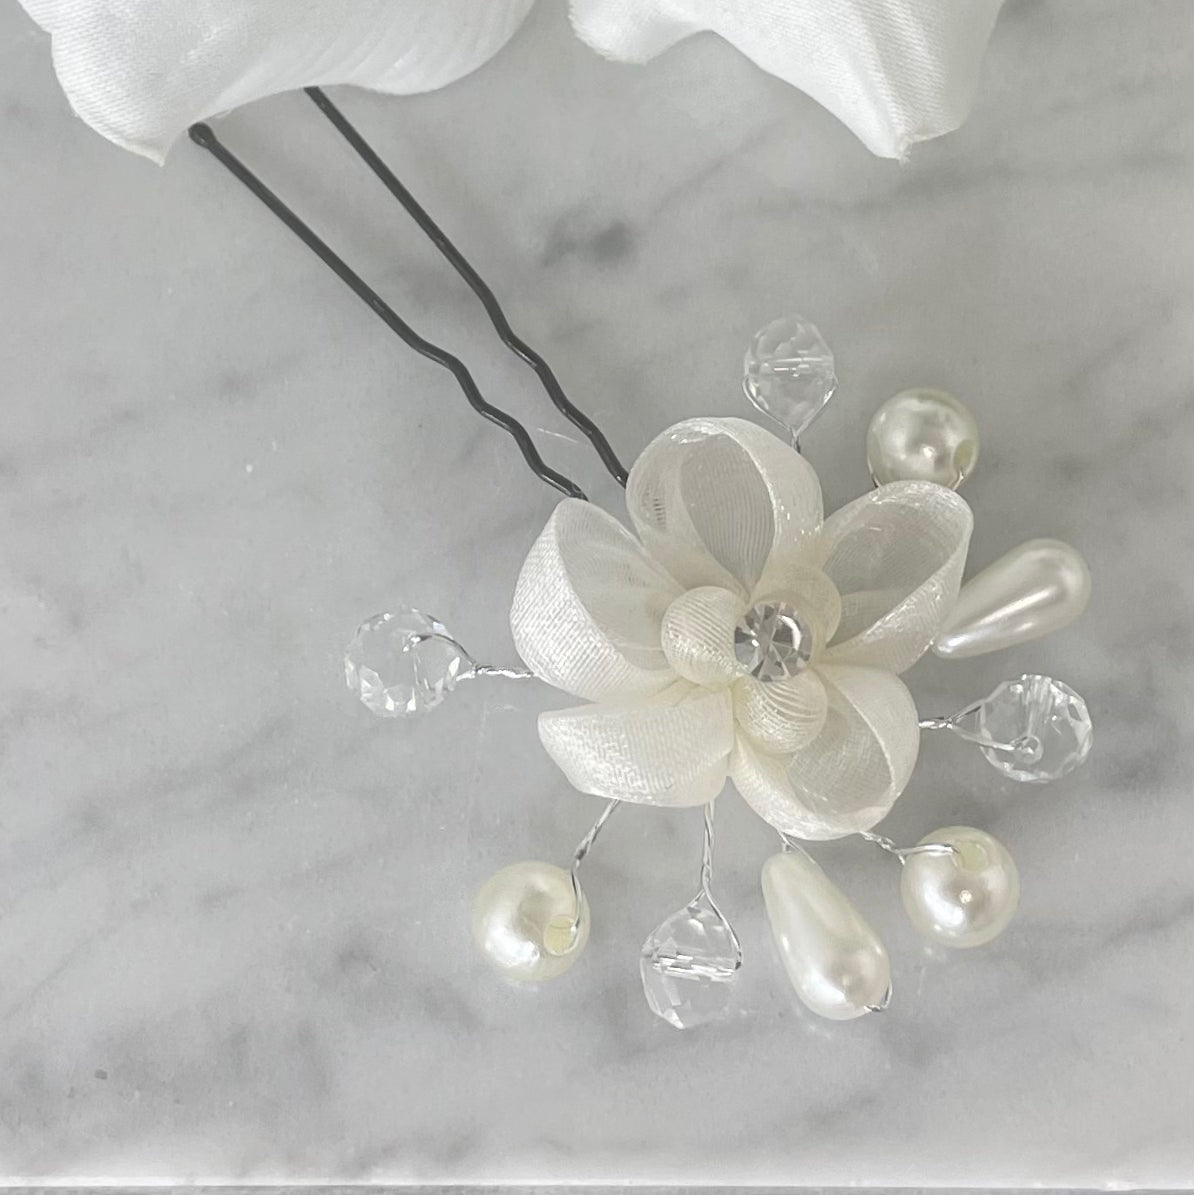 Chic Flower, Diamantés, and Pearl Hairpins featuring a black pin with organza flower, crystals, and pearls, ideal for adding elegance and sparkle to bridal and everyday hairstyles.